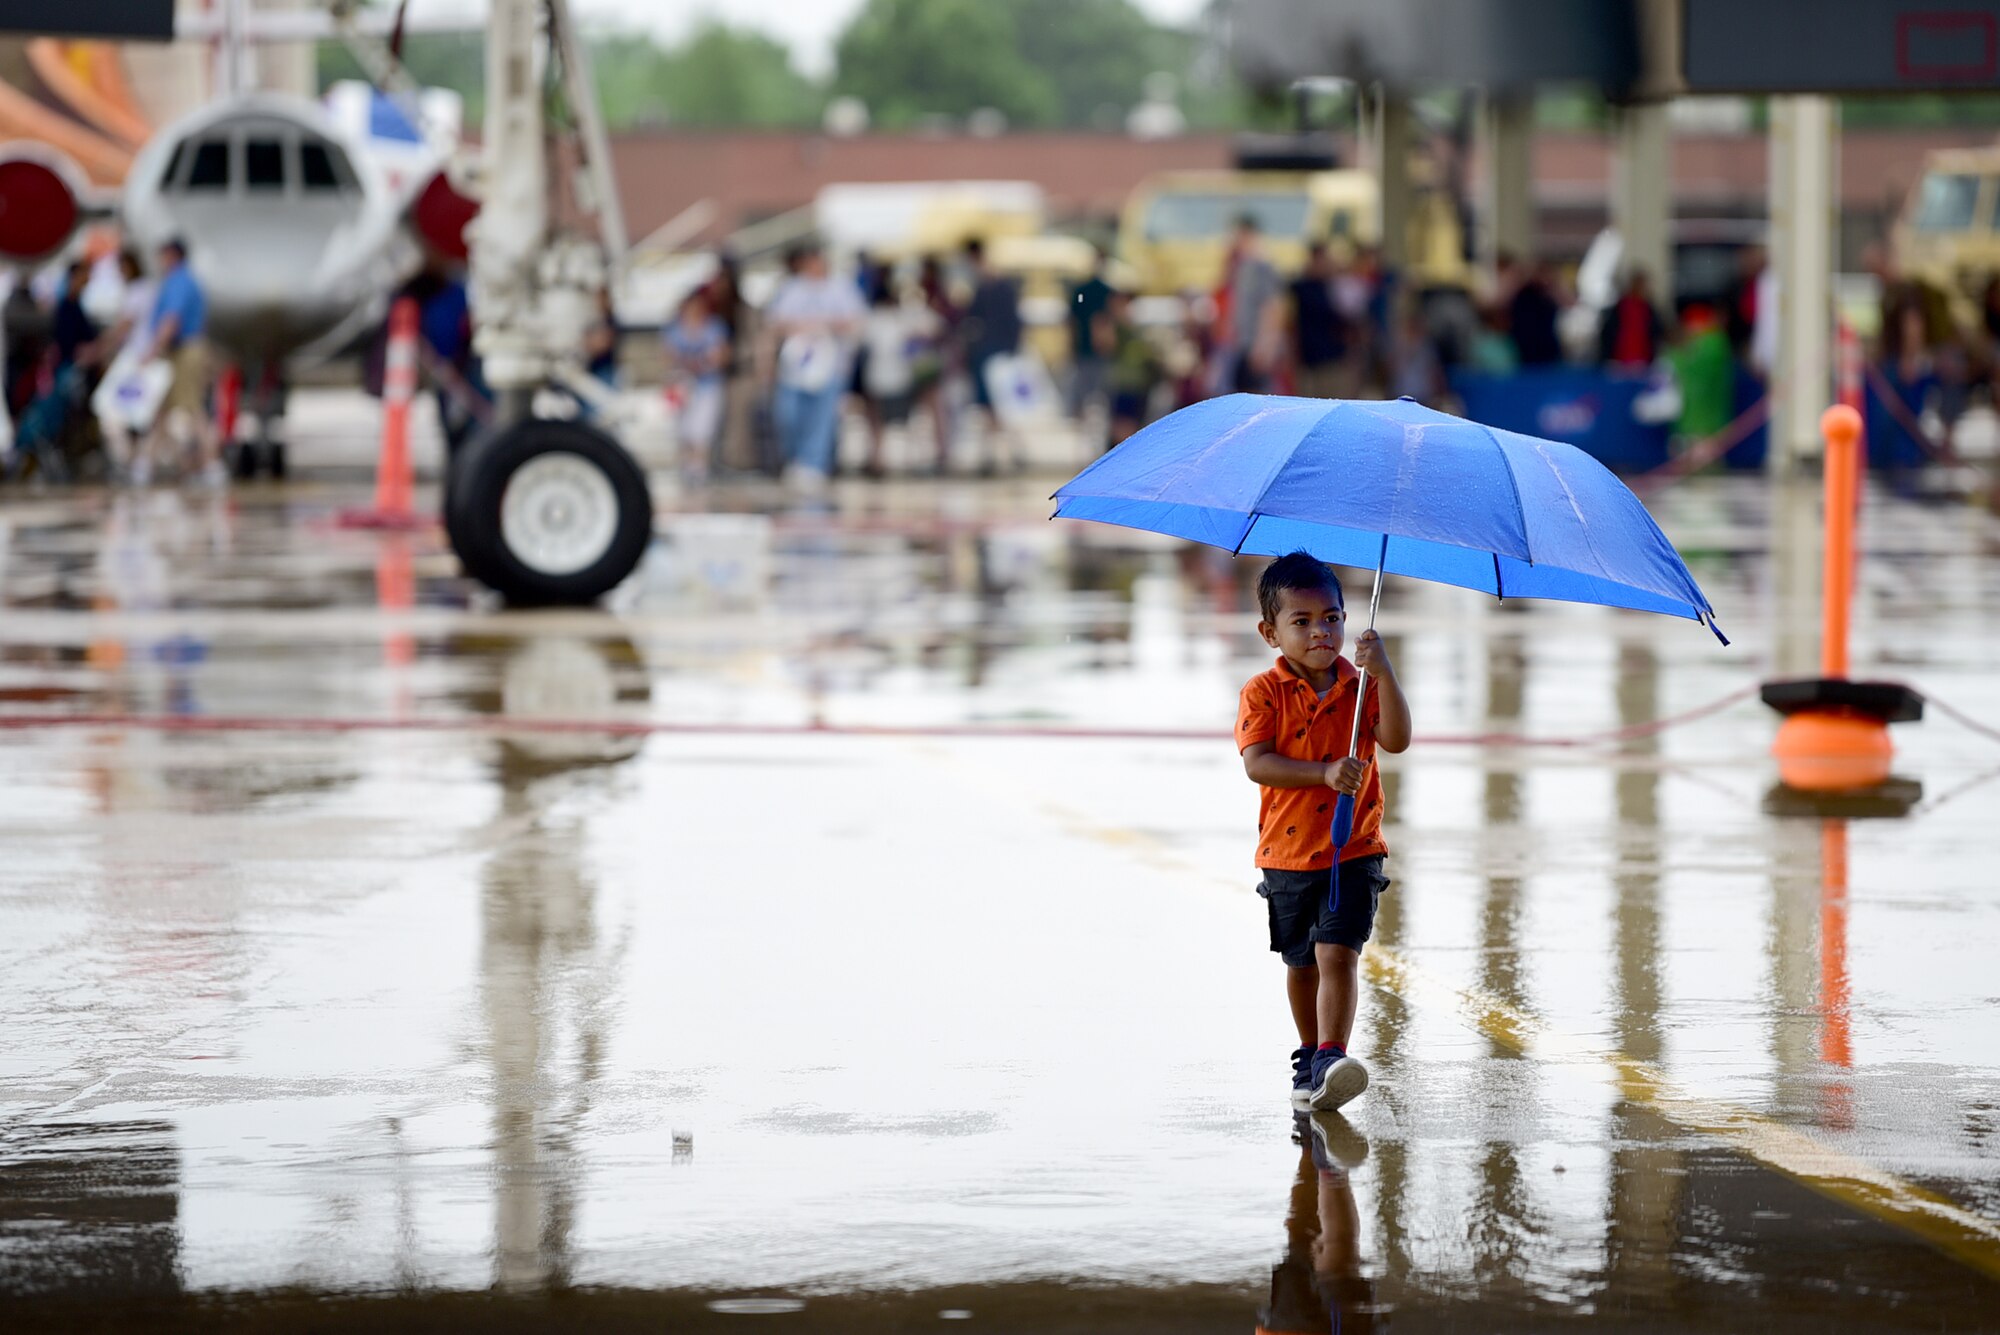 A child walks with umbrella in hand toward the MQ-9 Reaper at Joint Base Langley-Eustis, Virginia, May 19, 2018. The MQ-9 Display gathered the attention of aviation enthusiasts of all ages over the weekend for the Airpower Over Hampton Roads air show. (U.S. Air Force photo by Airman 1st Class Haley Stevens)